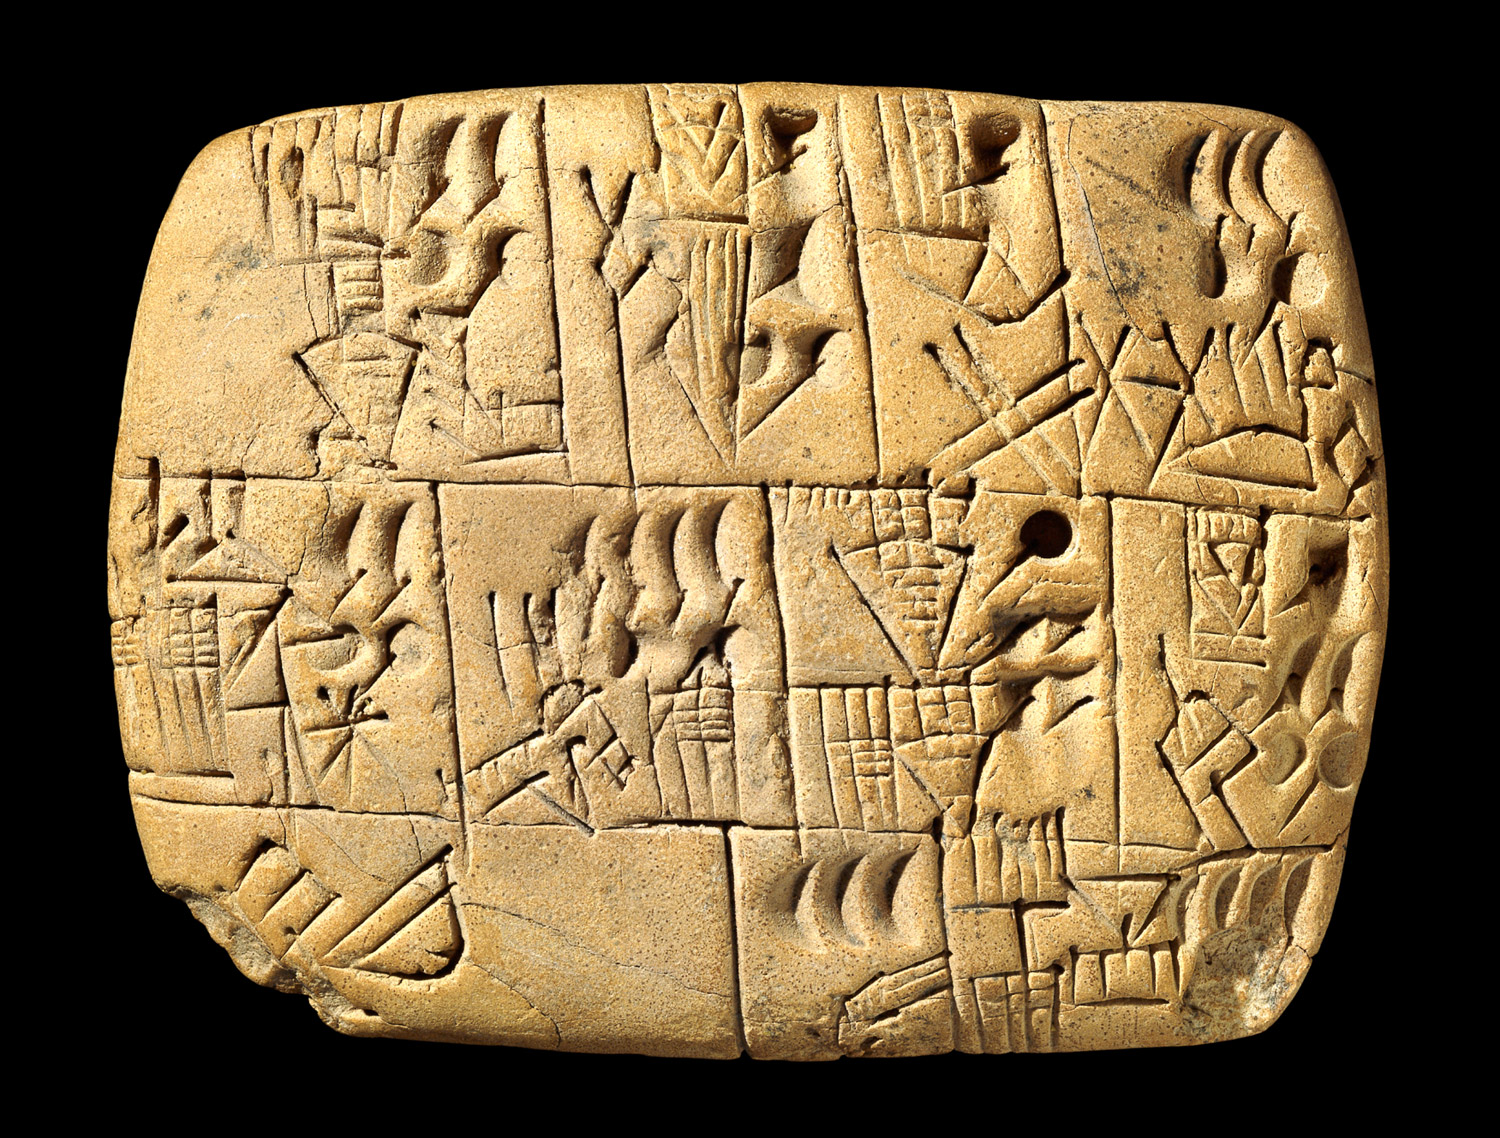 Rounded clay tablet on black ground with cuneiform signs.